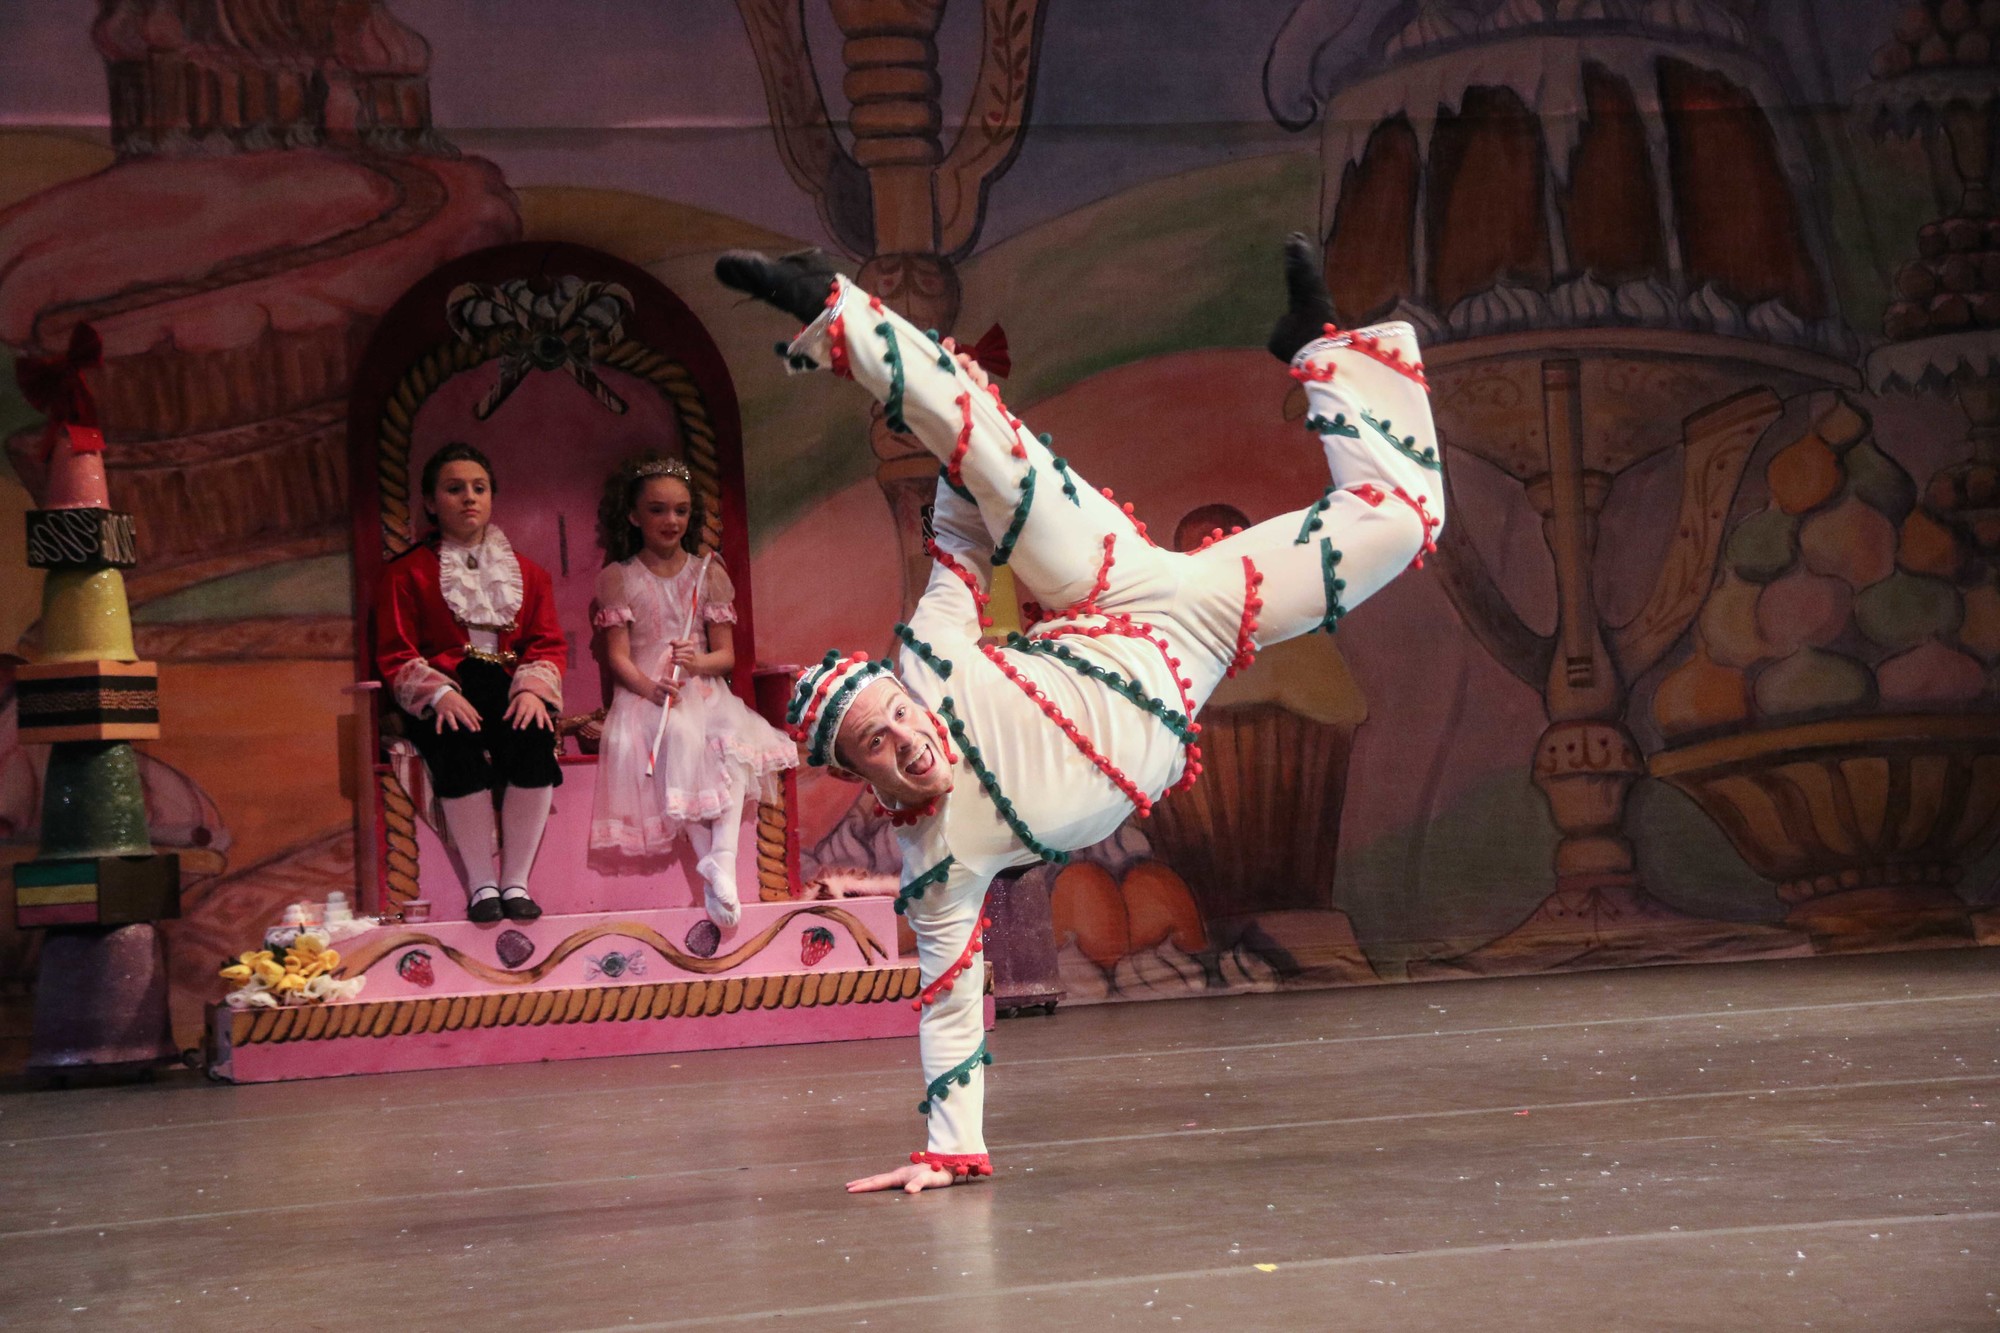 Noah Gouldsmith, as a Candy Cane, danced for Clara and the Prince.